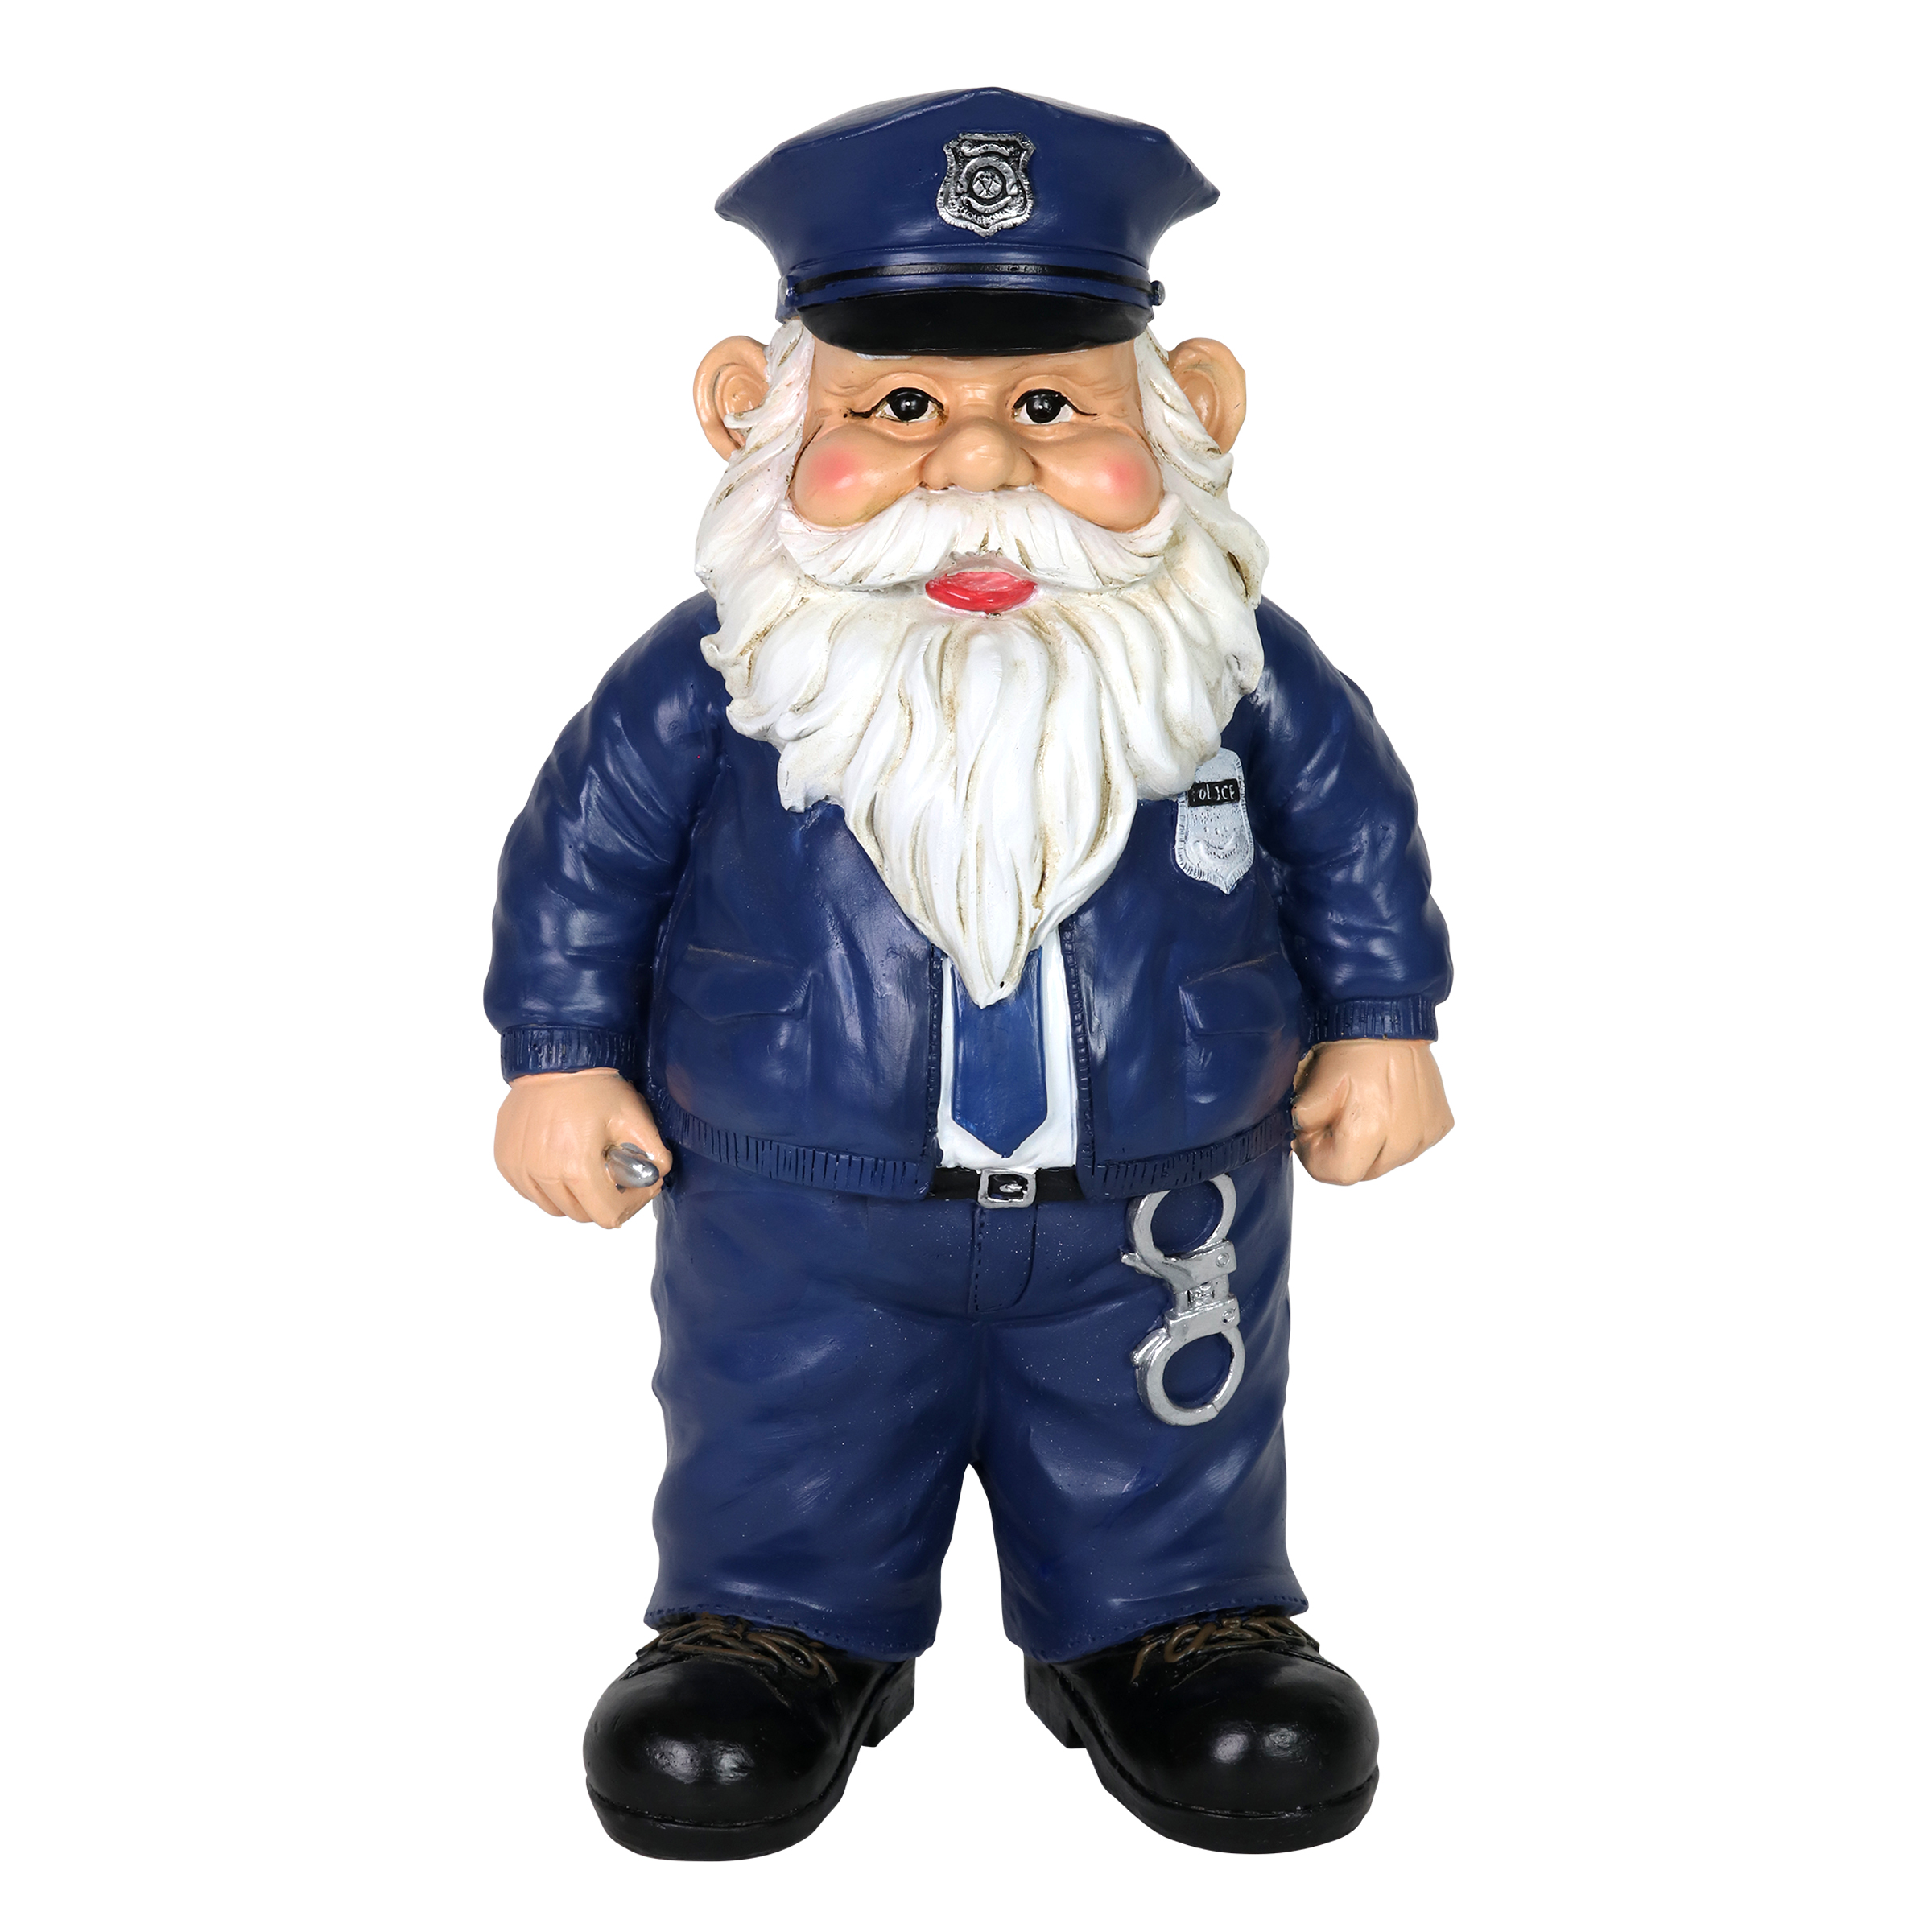 Exhart Policeman Gnome Statuary, 7.5 by 13 inches, Resin, Multicolor - image 1 of 7